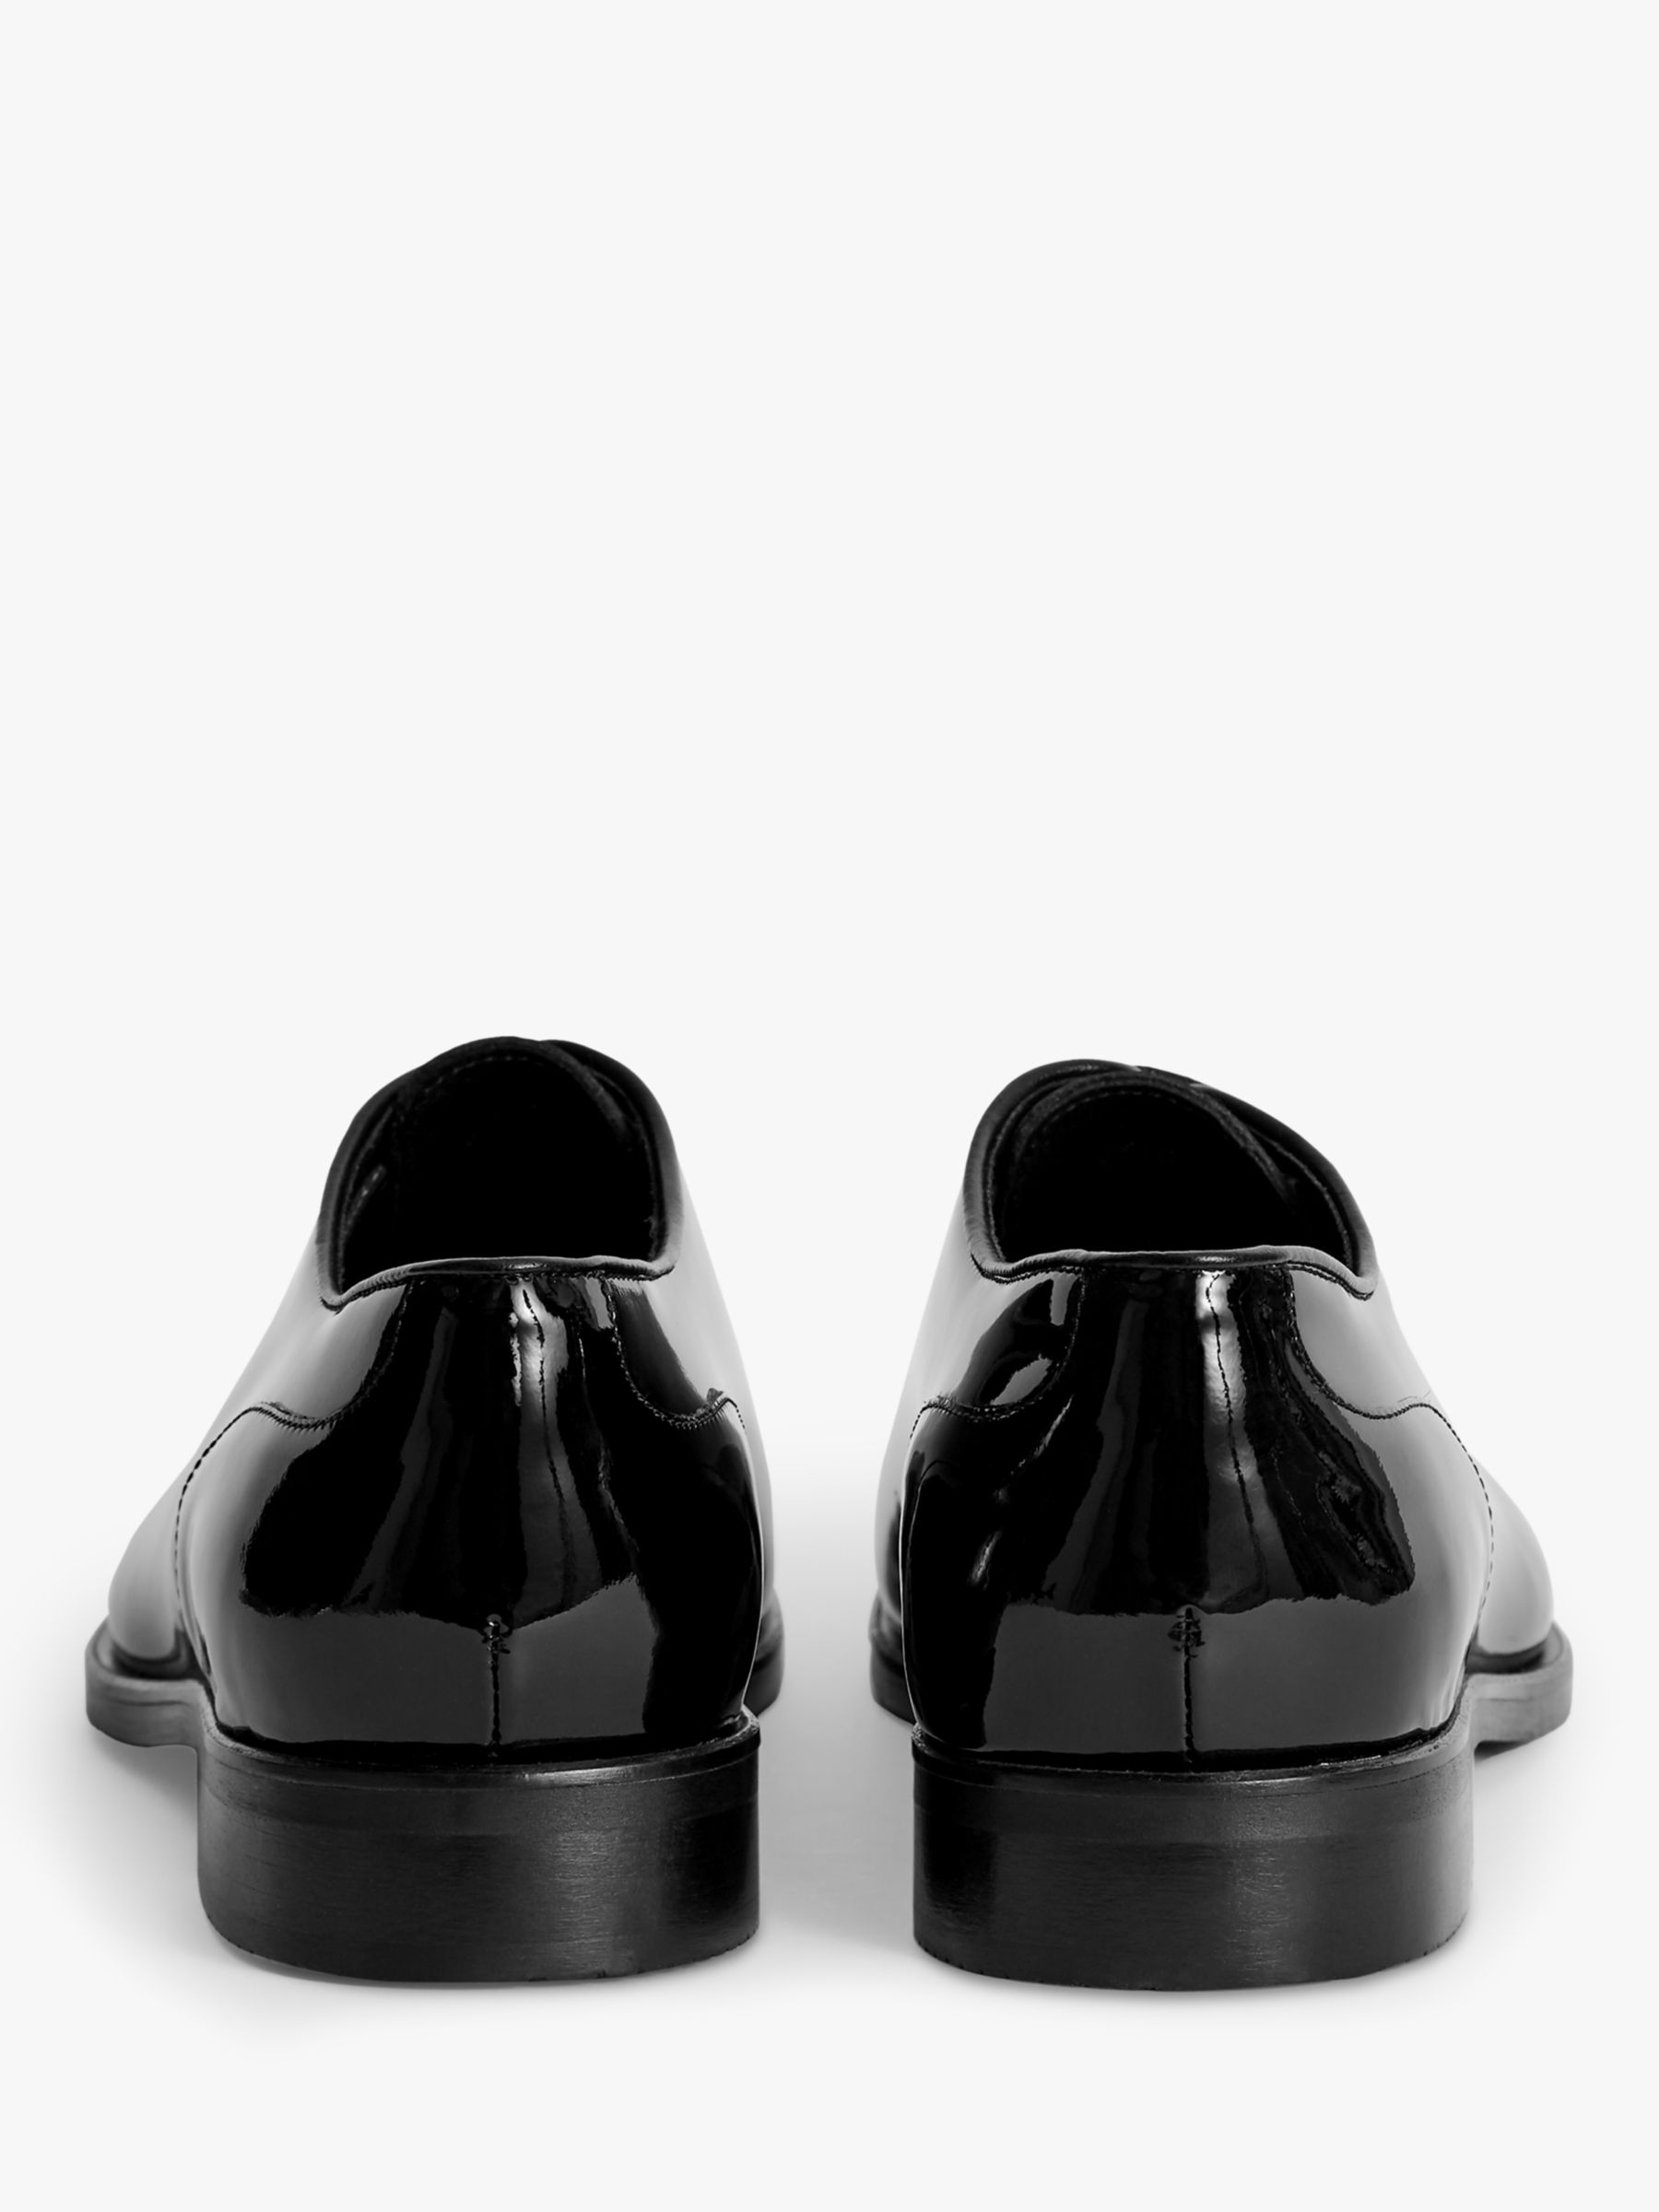 Reiss Bay Patent Leather Whole Cut Shoes, Black at John Lewis & Partners